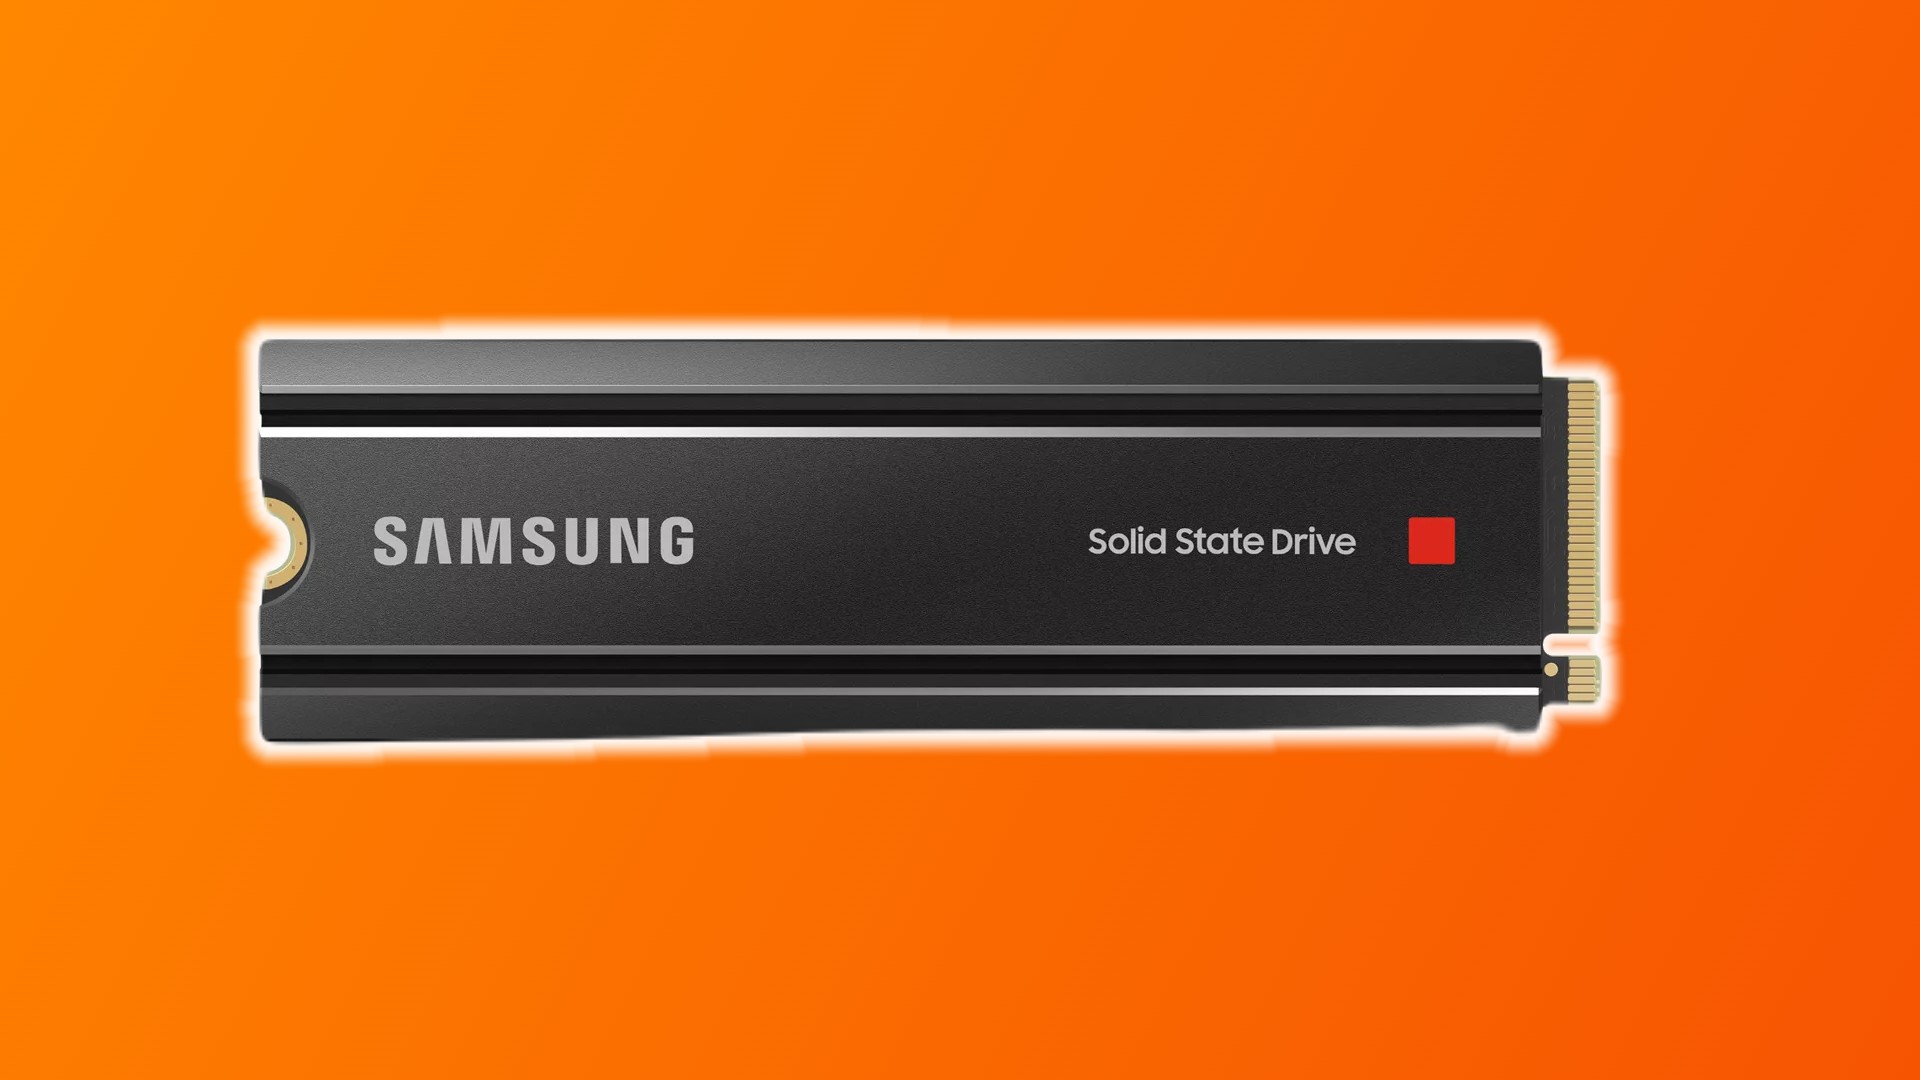 Save up to $52 on a Samsung gaming SSD, perfect for PC or PS5